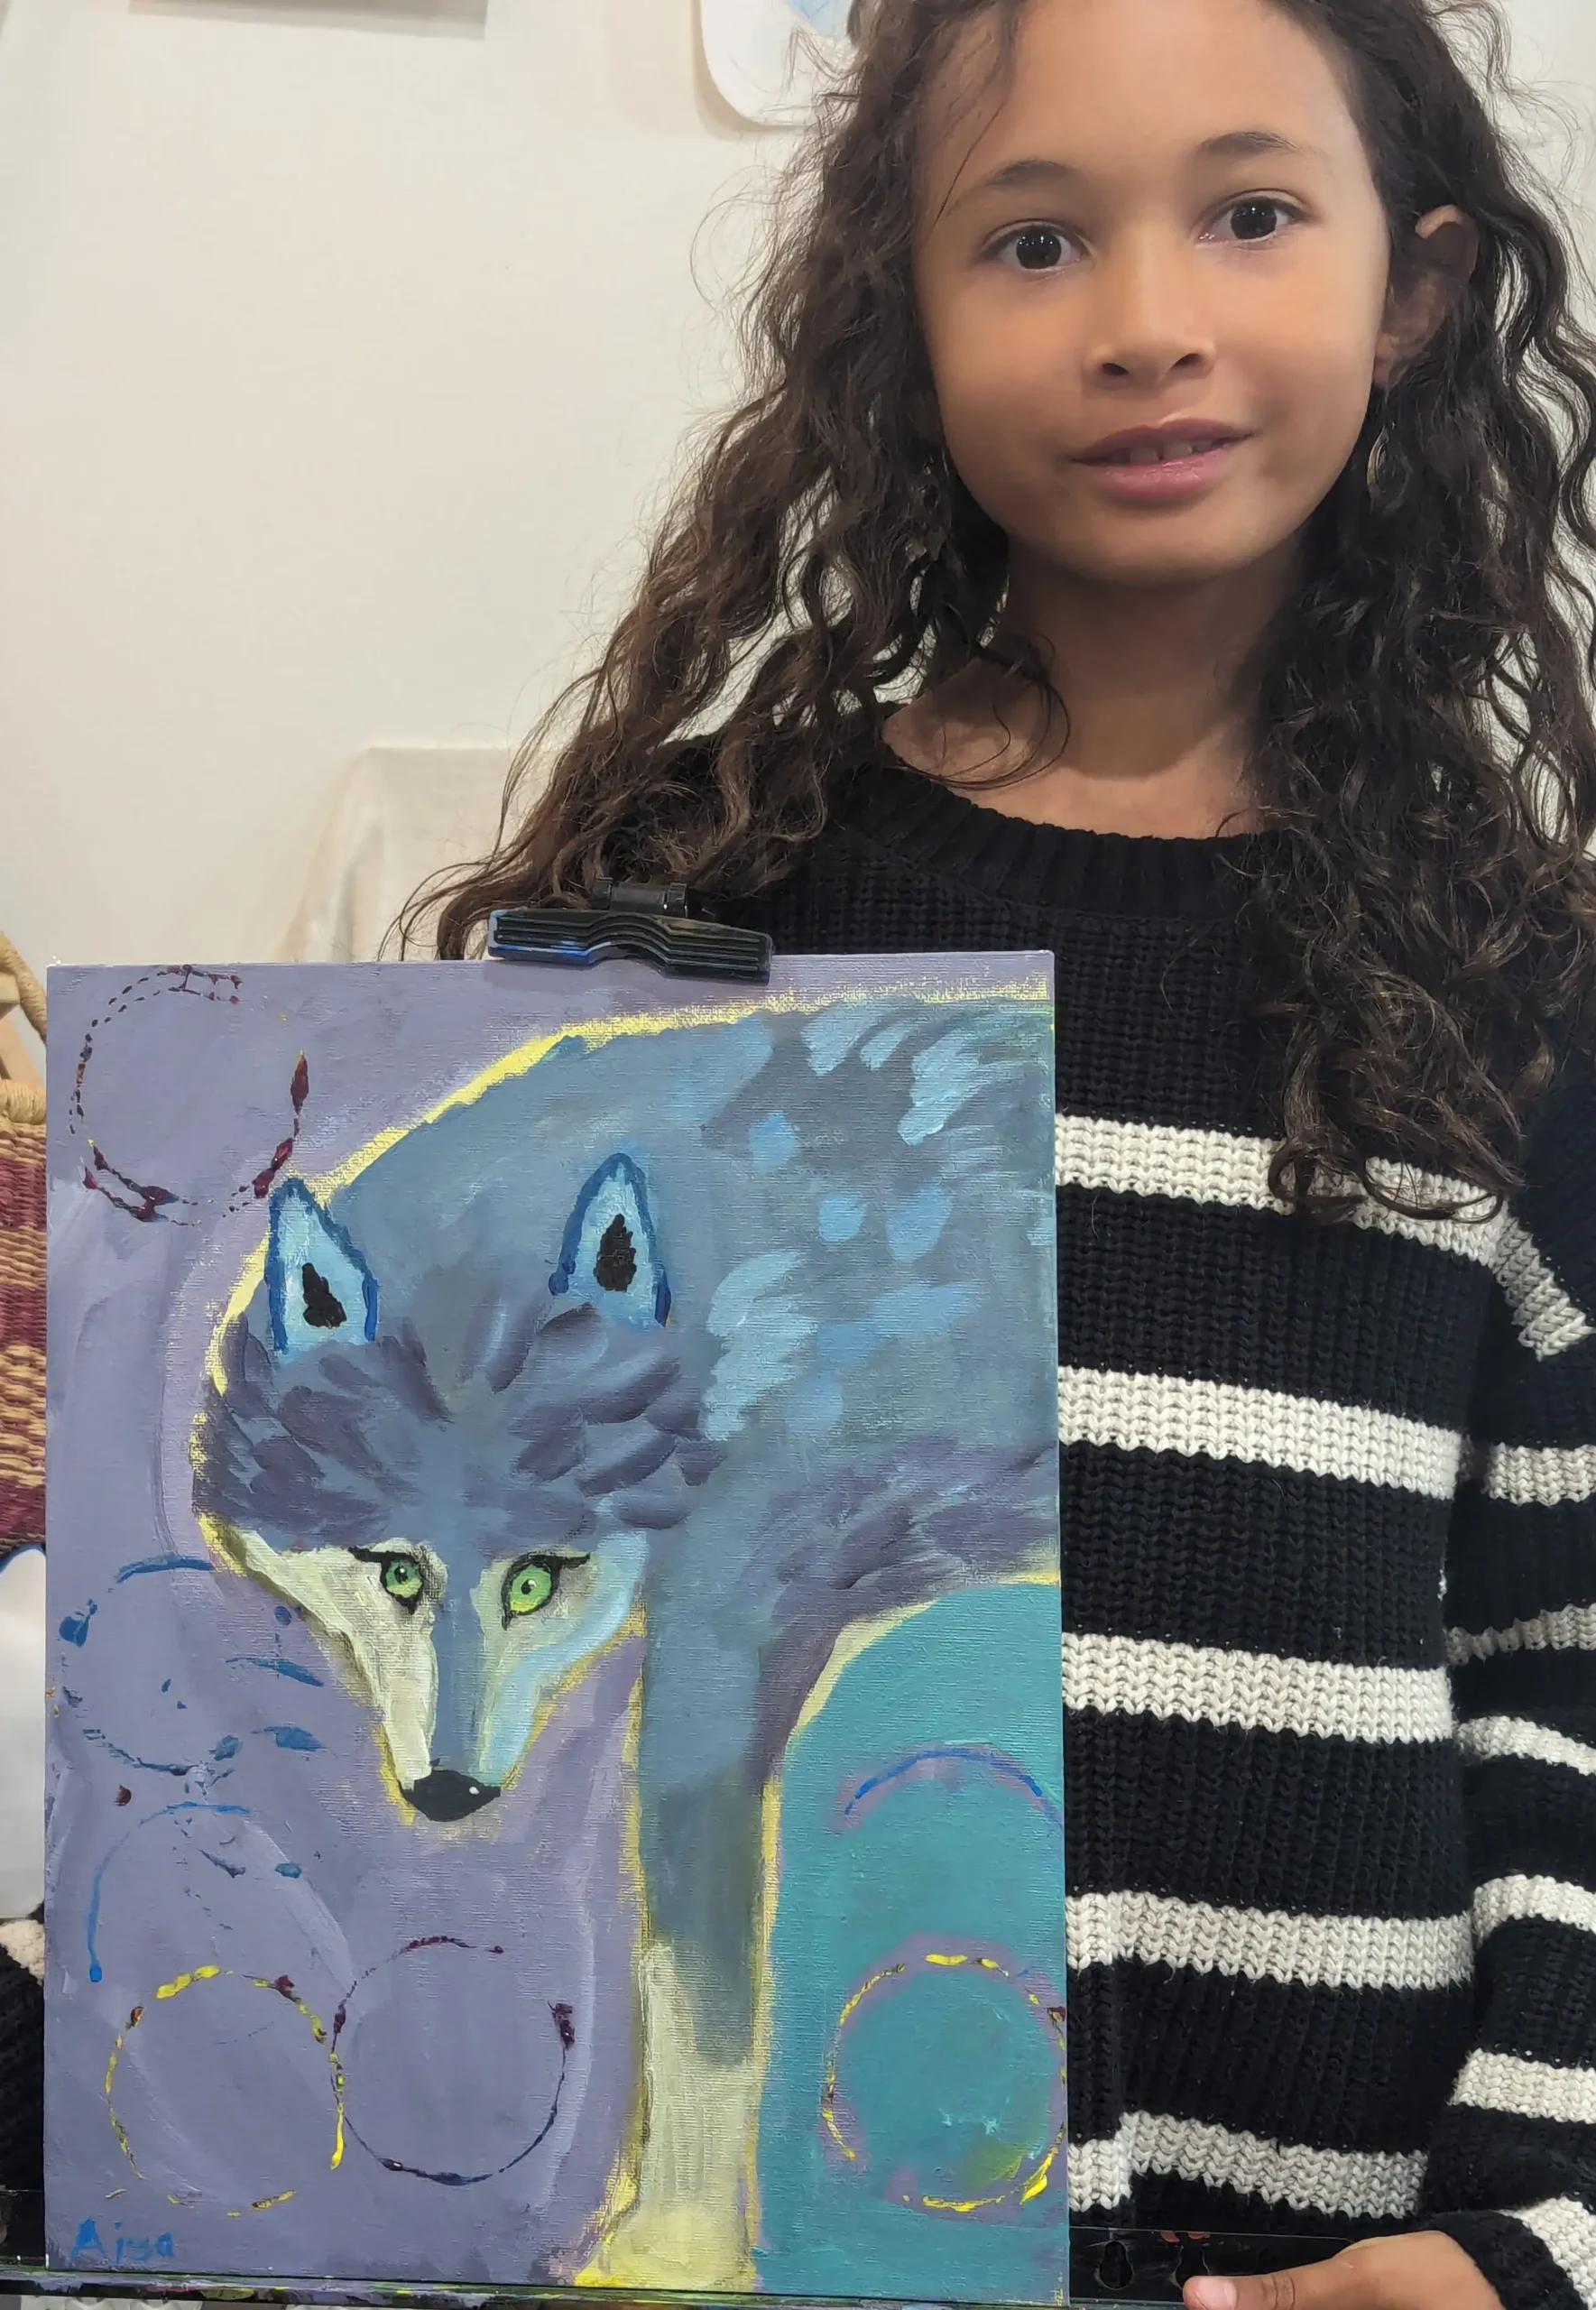 artwork of wolf being held by a young girl art student